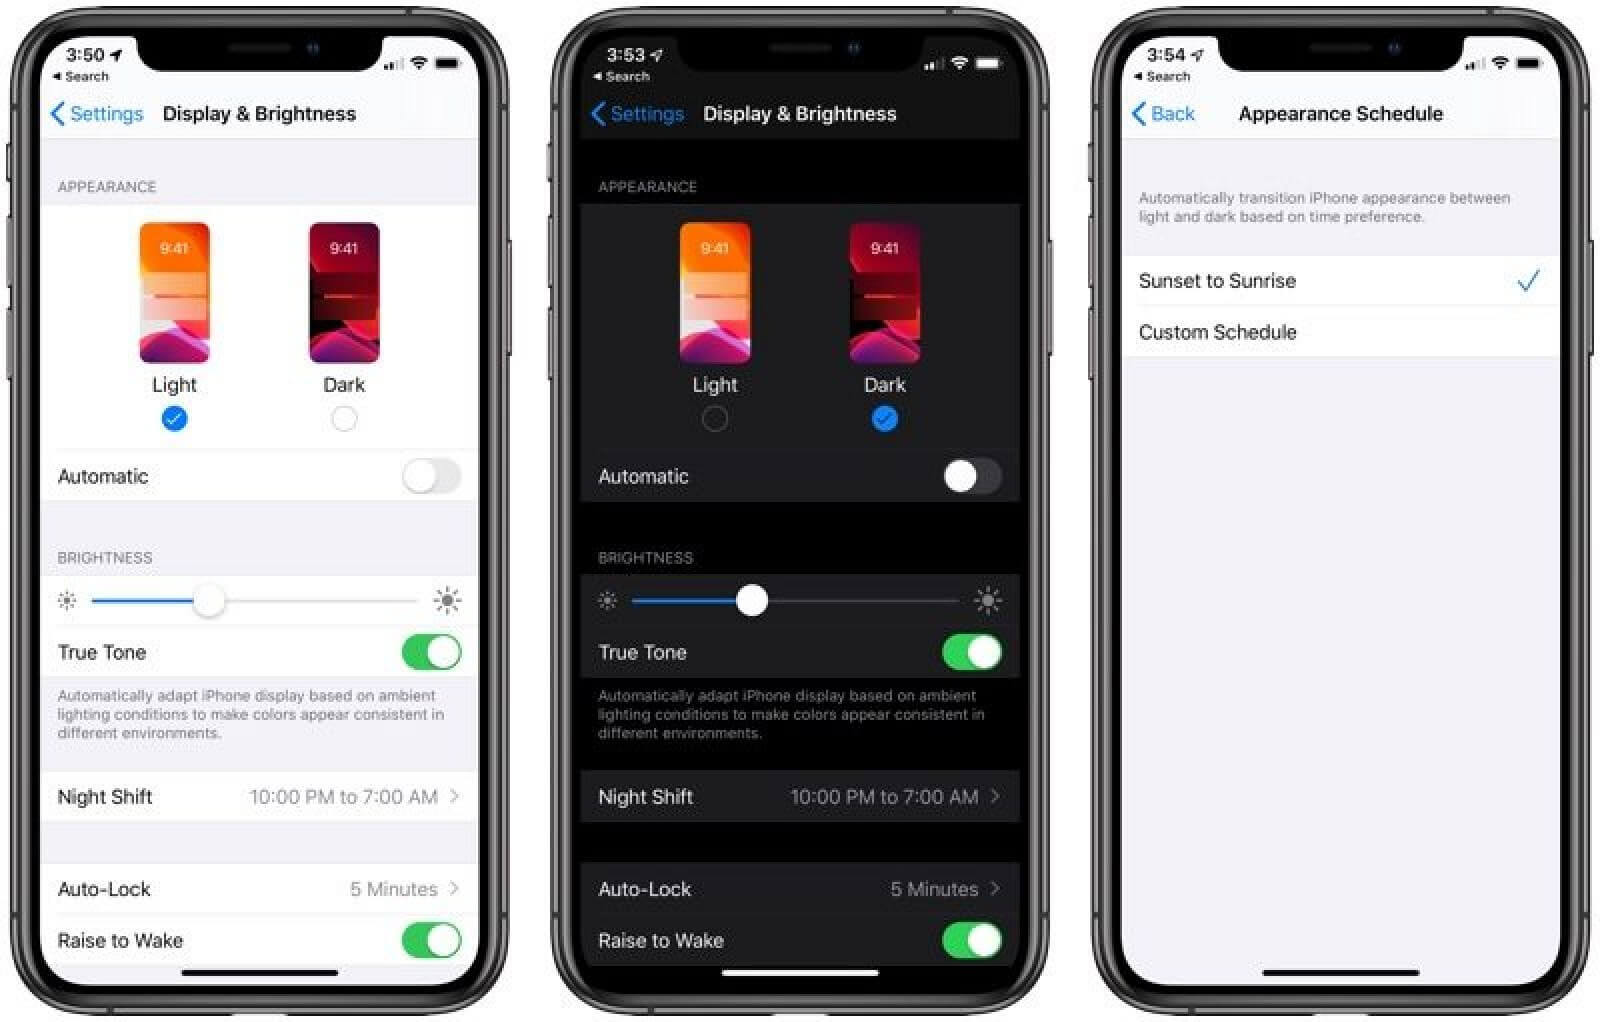 Being one of the most popular iOS 13 rumors, Dark Mood is finally released